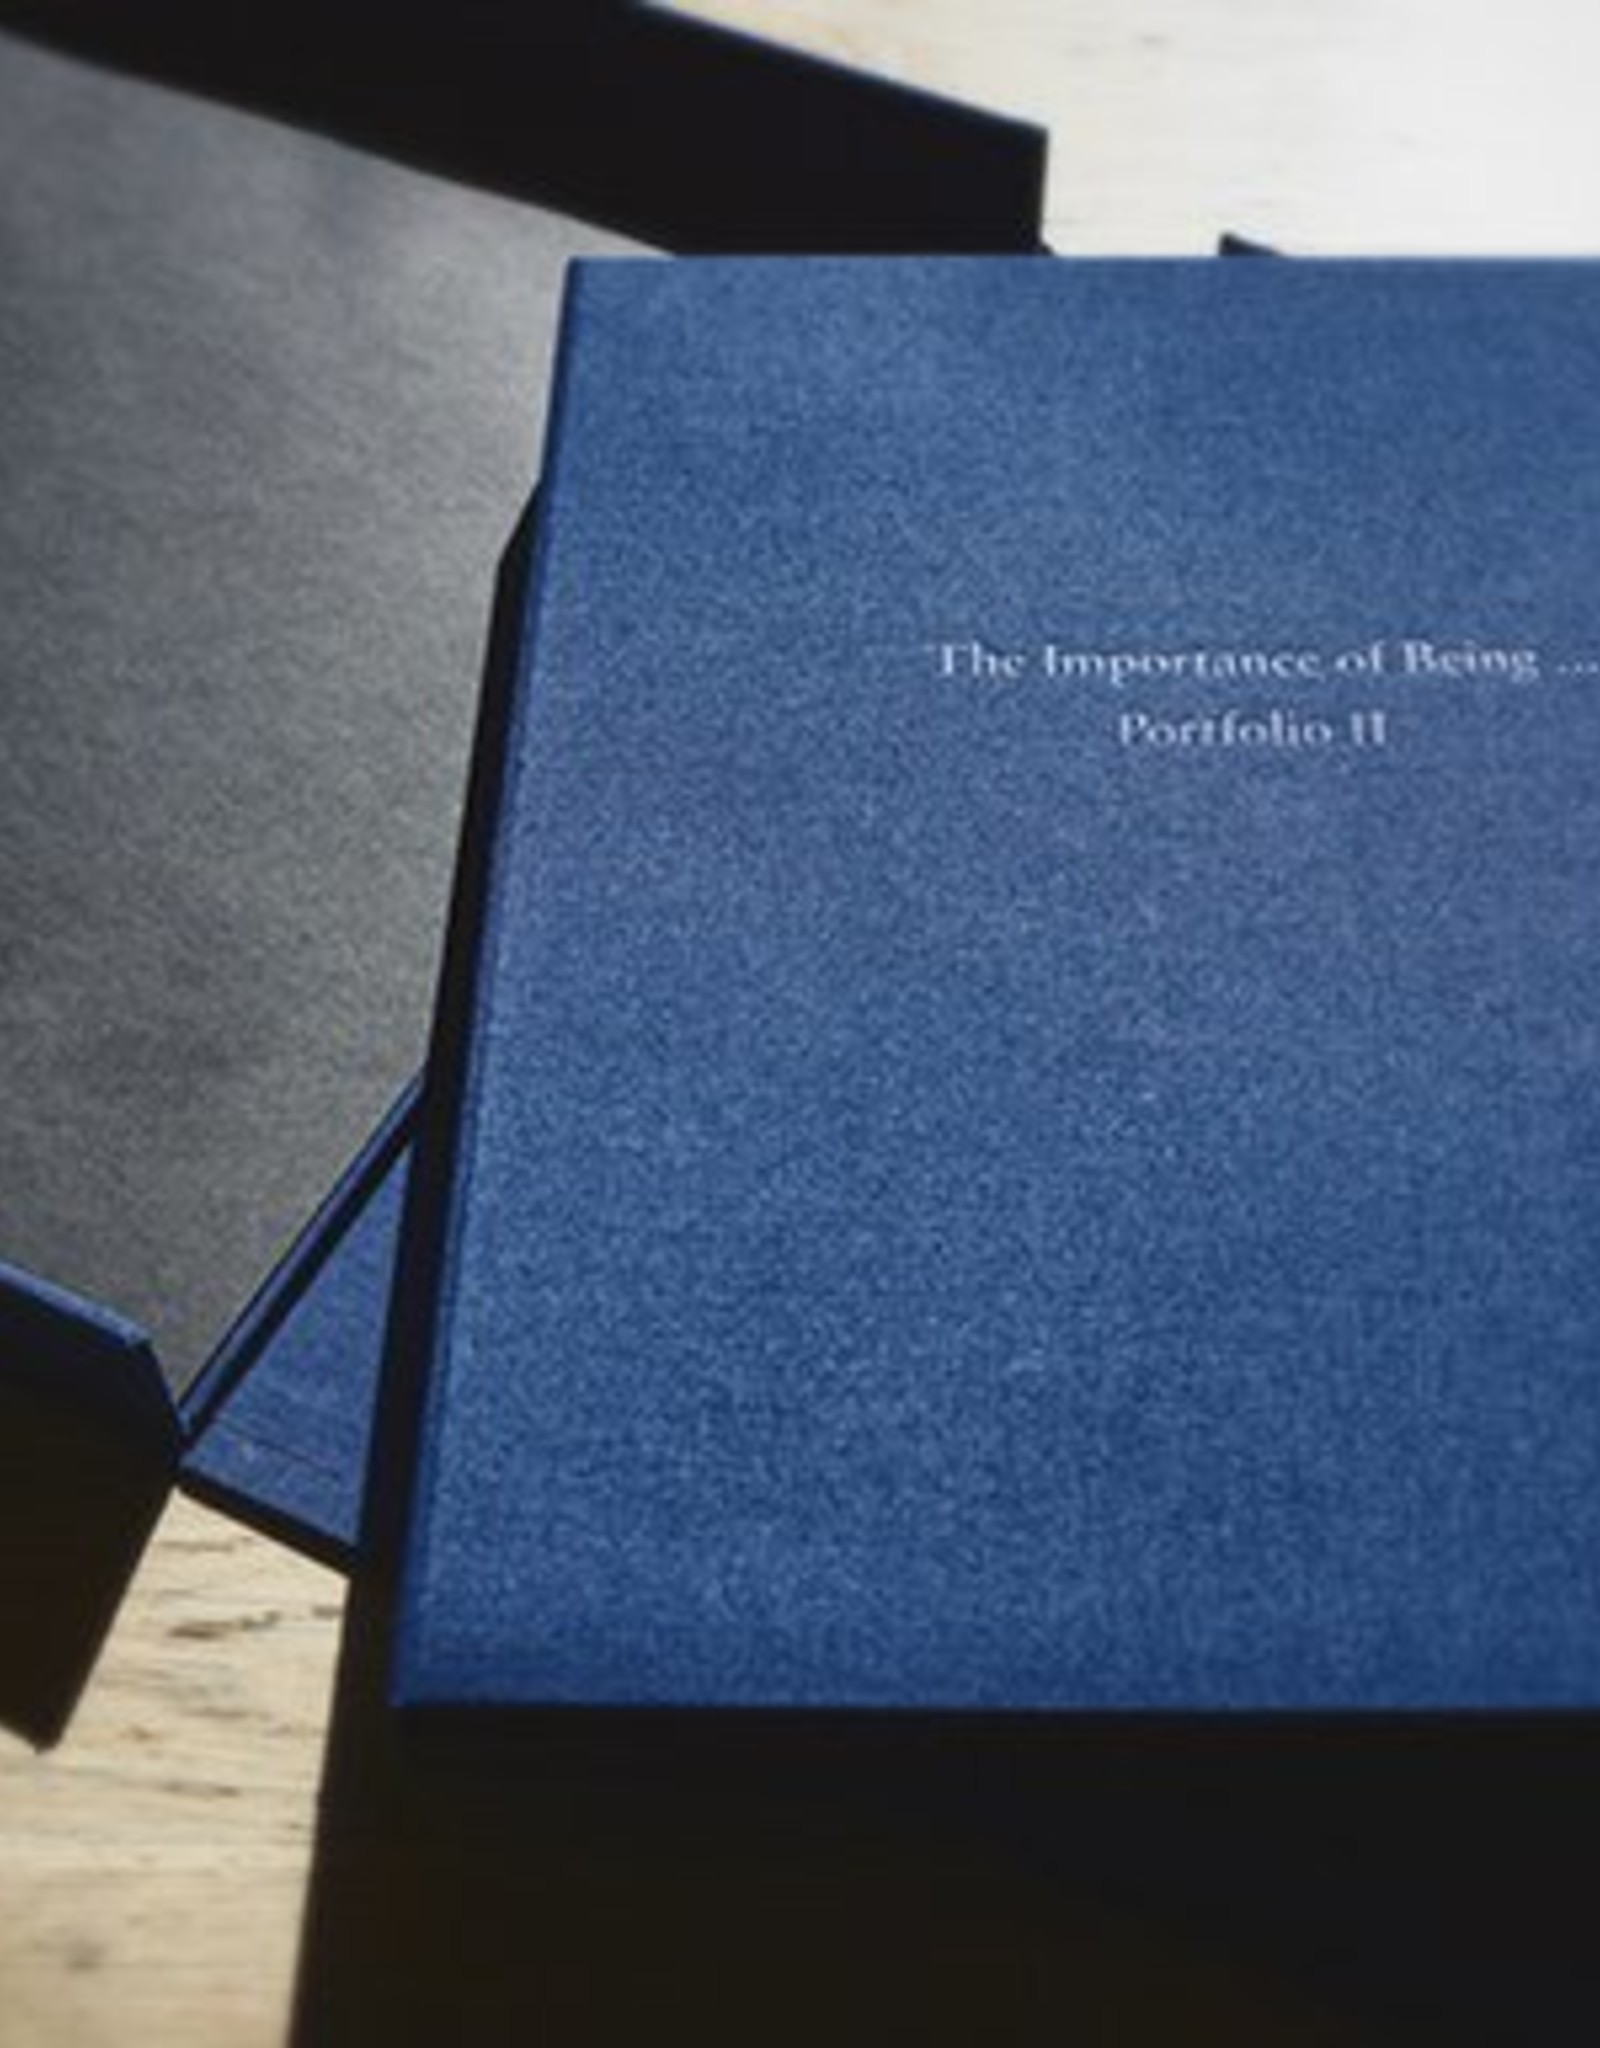 The Importance of Being: a limited edition portfolio of Belgian artists